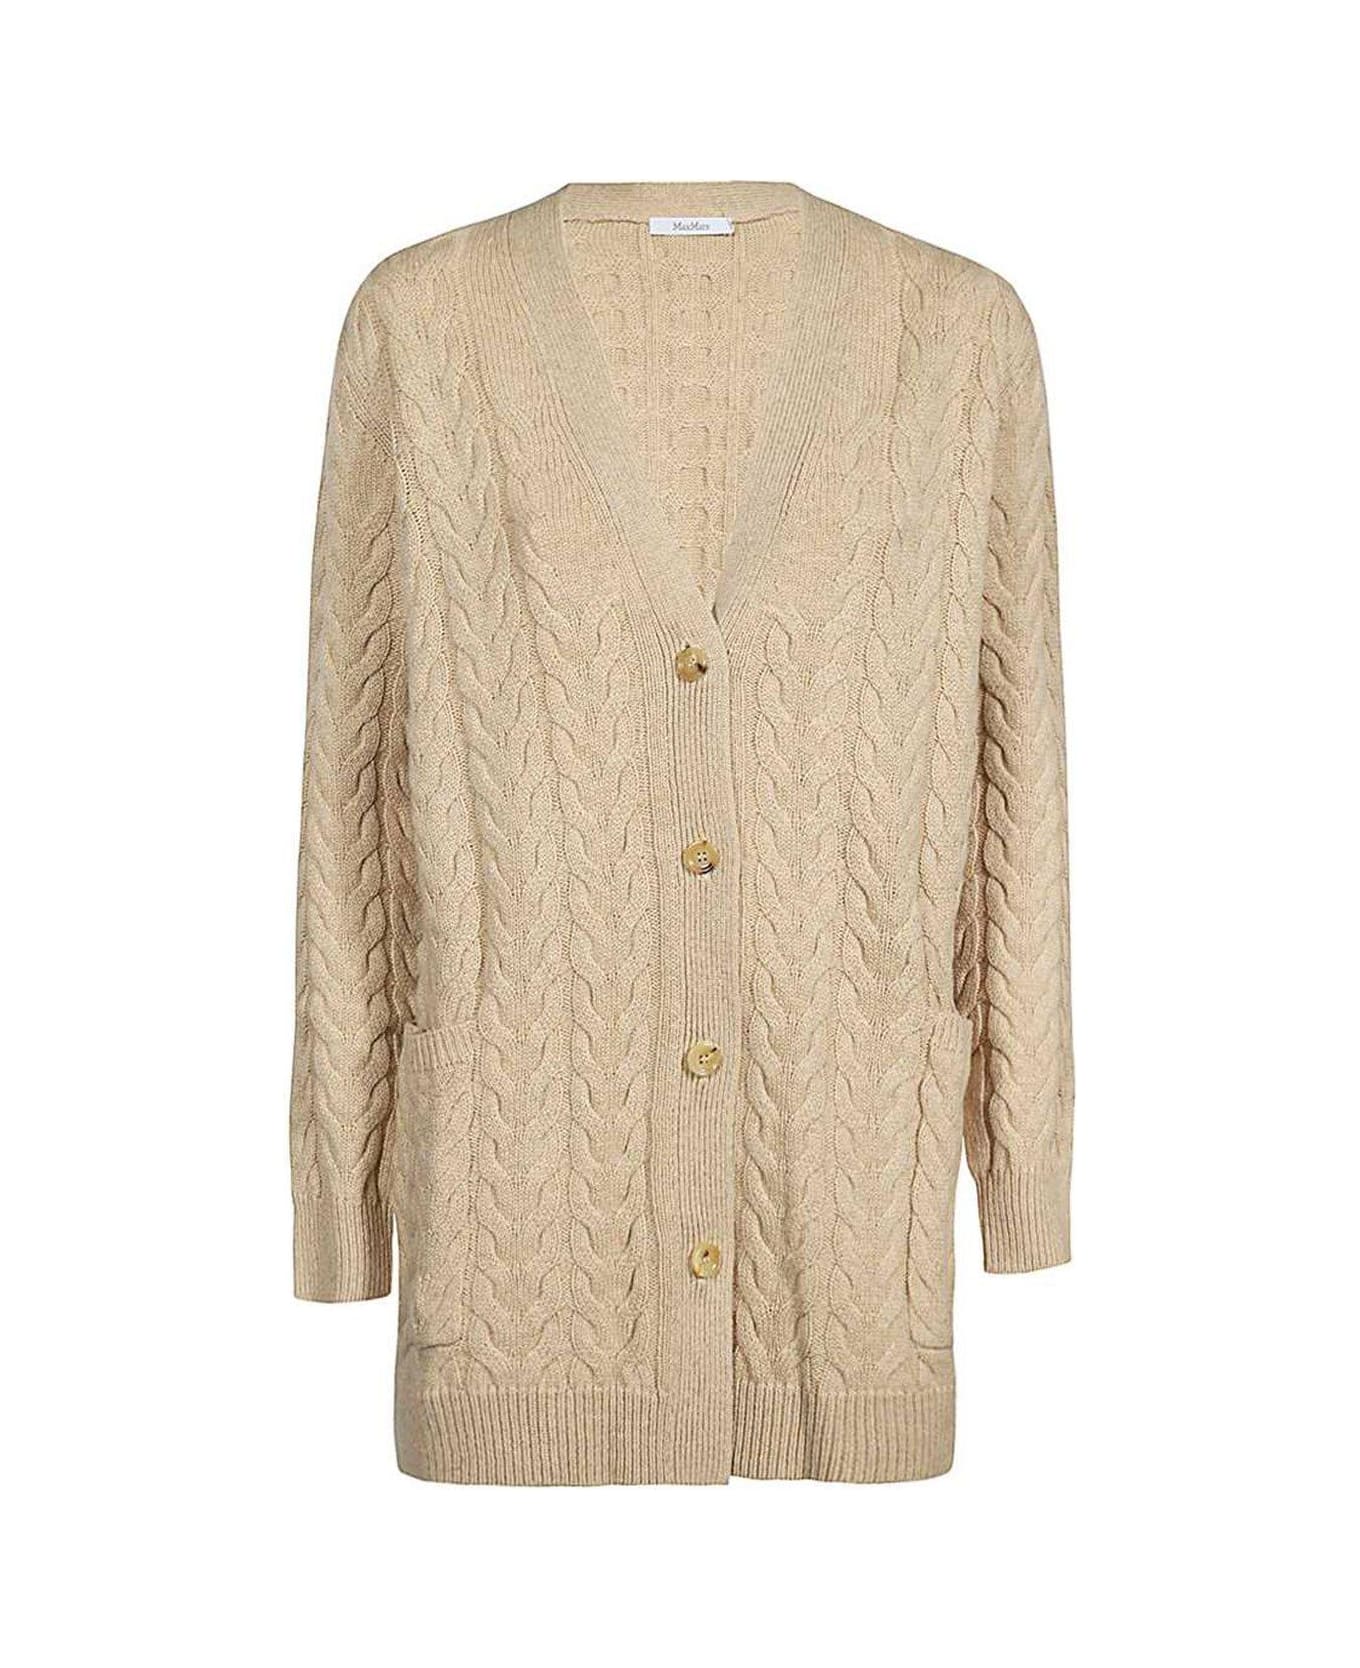 Max Mara Buttoned Long-sleeved Knitted Cardigan